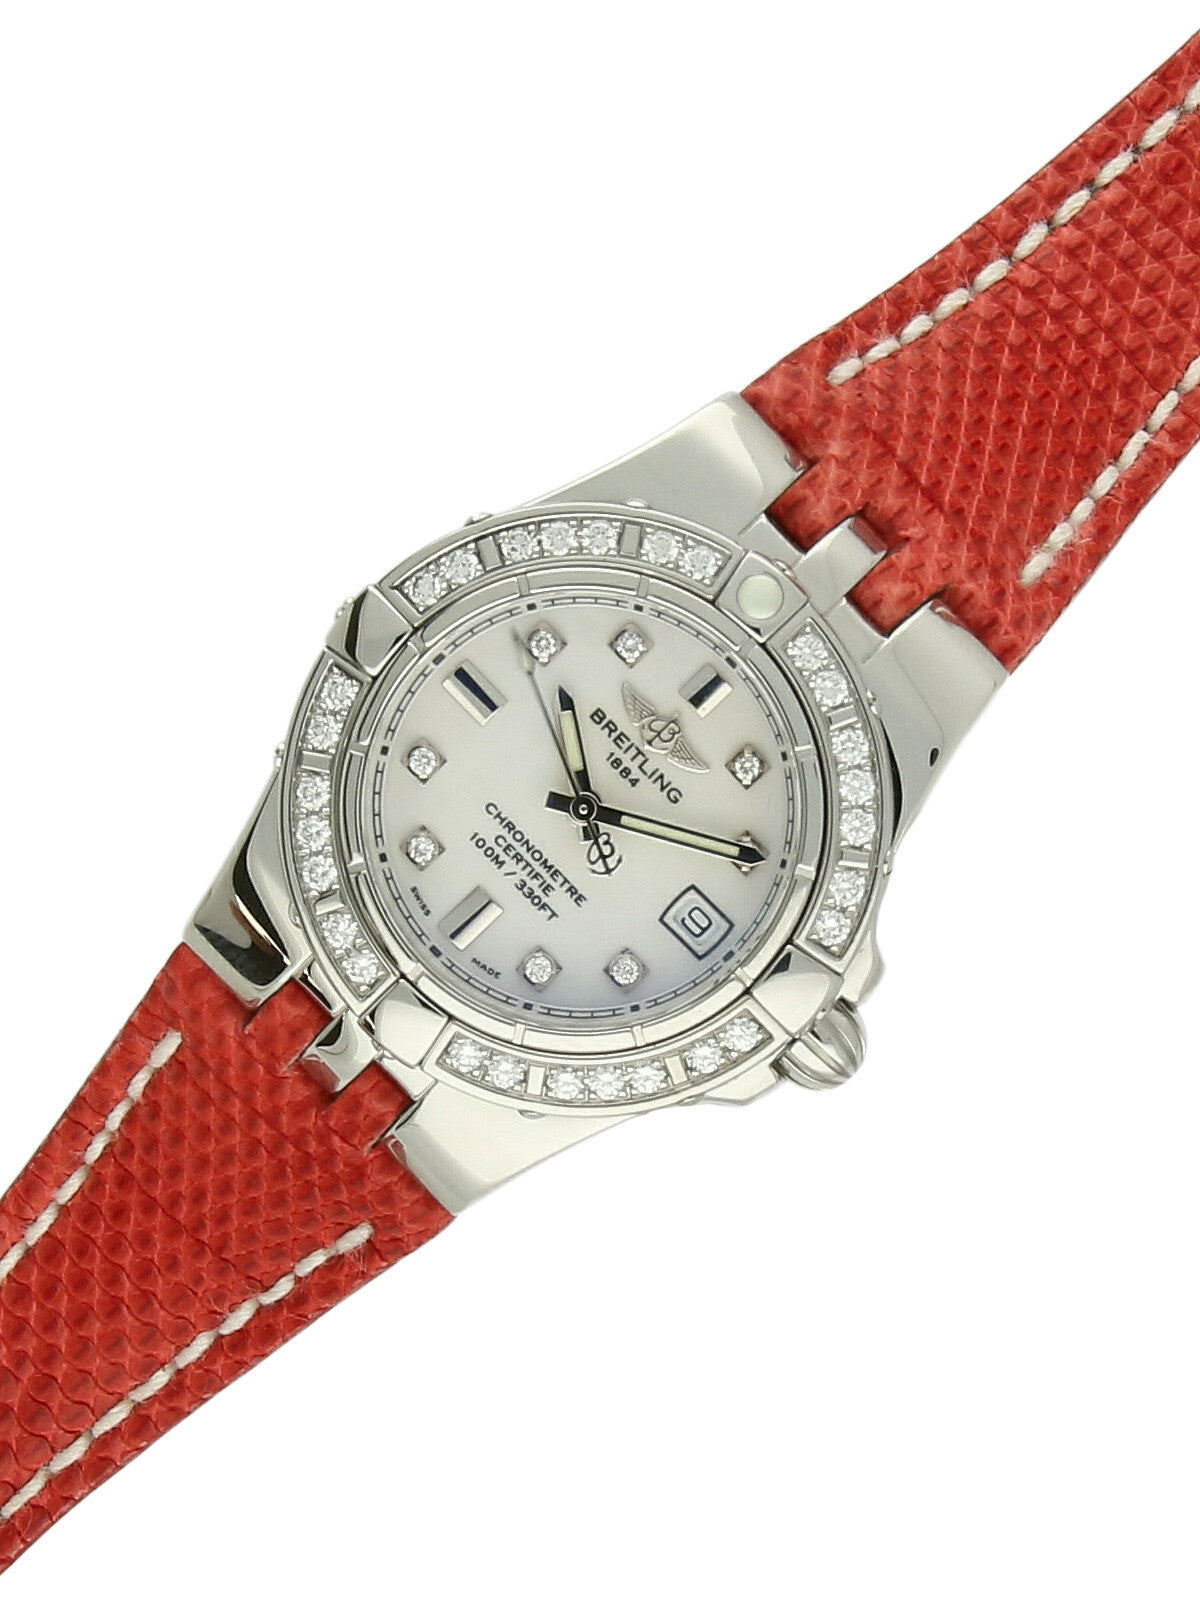 Pre Owned Breitling Galactic 30 Steel Quartz 30mm Watch on Red Leather Strap